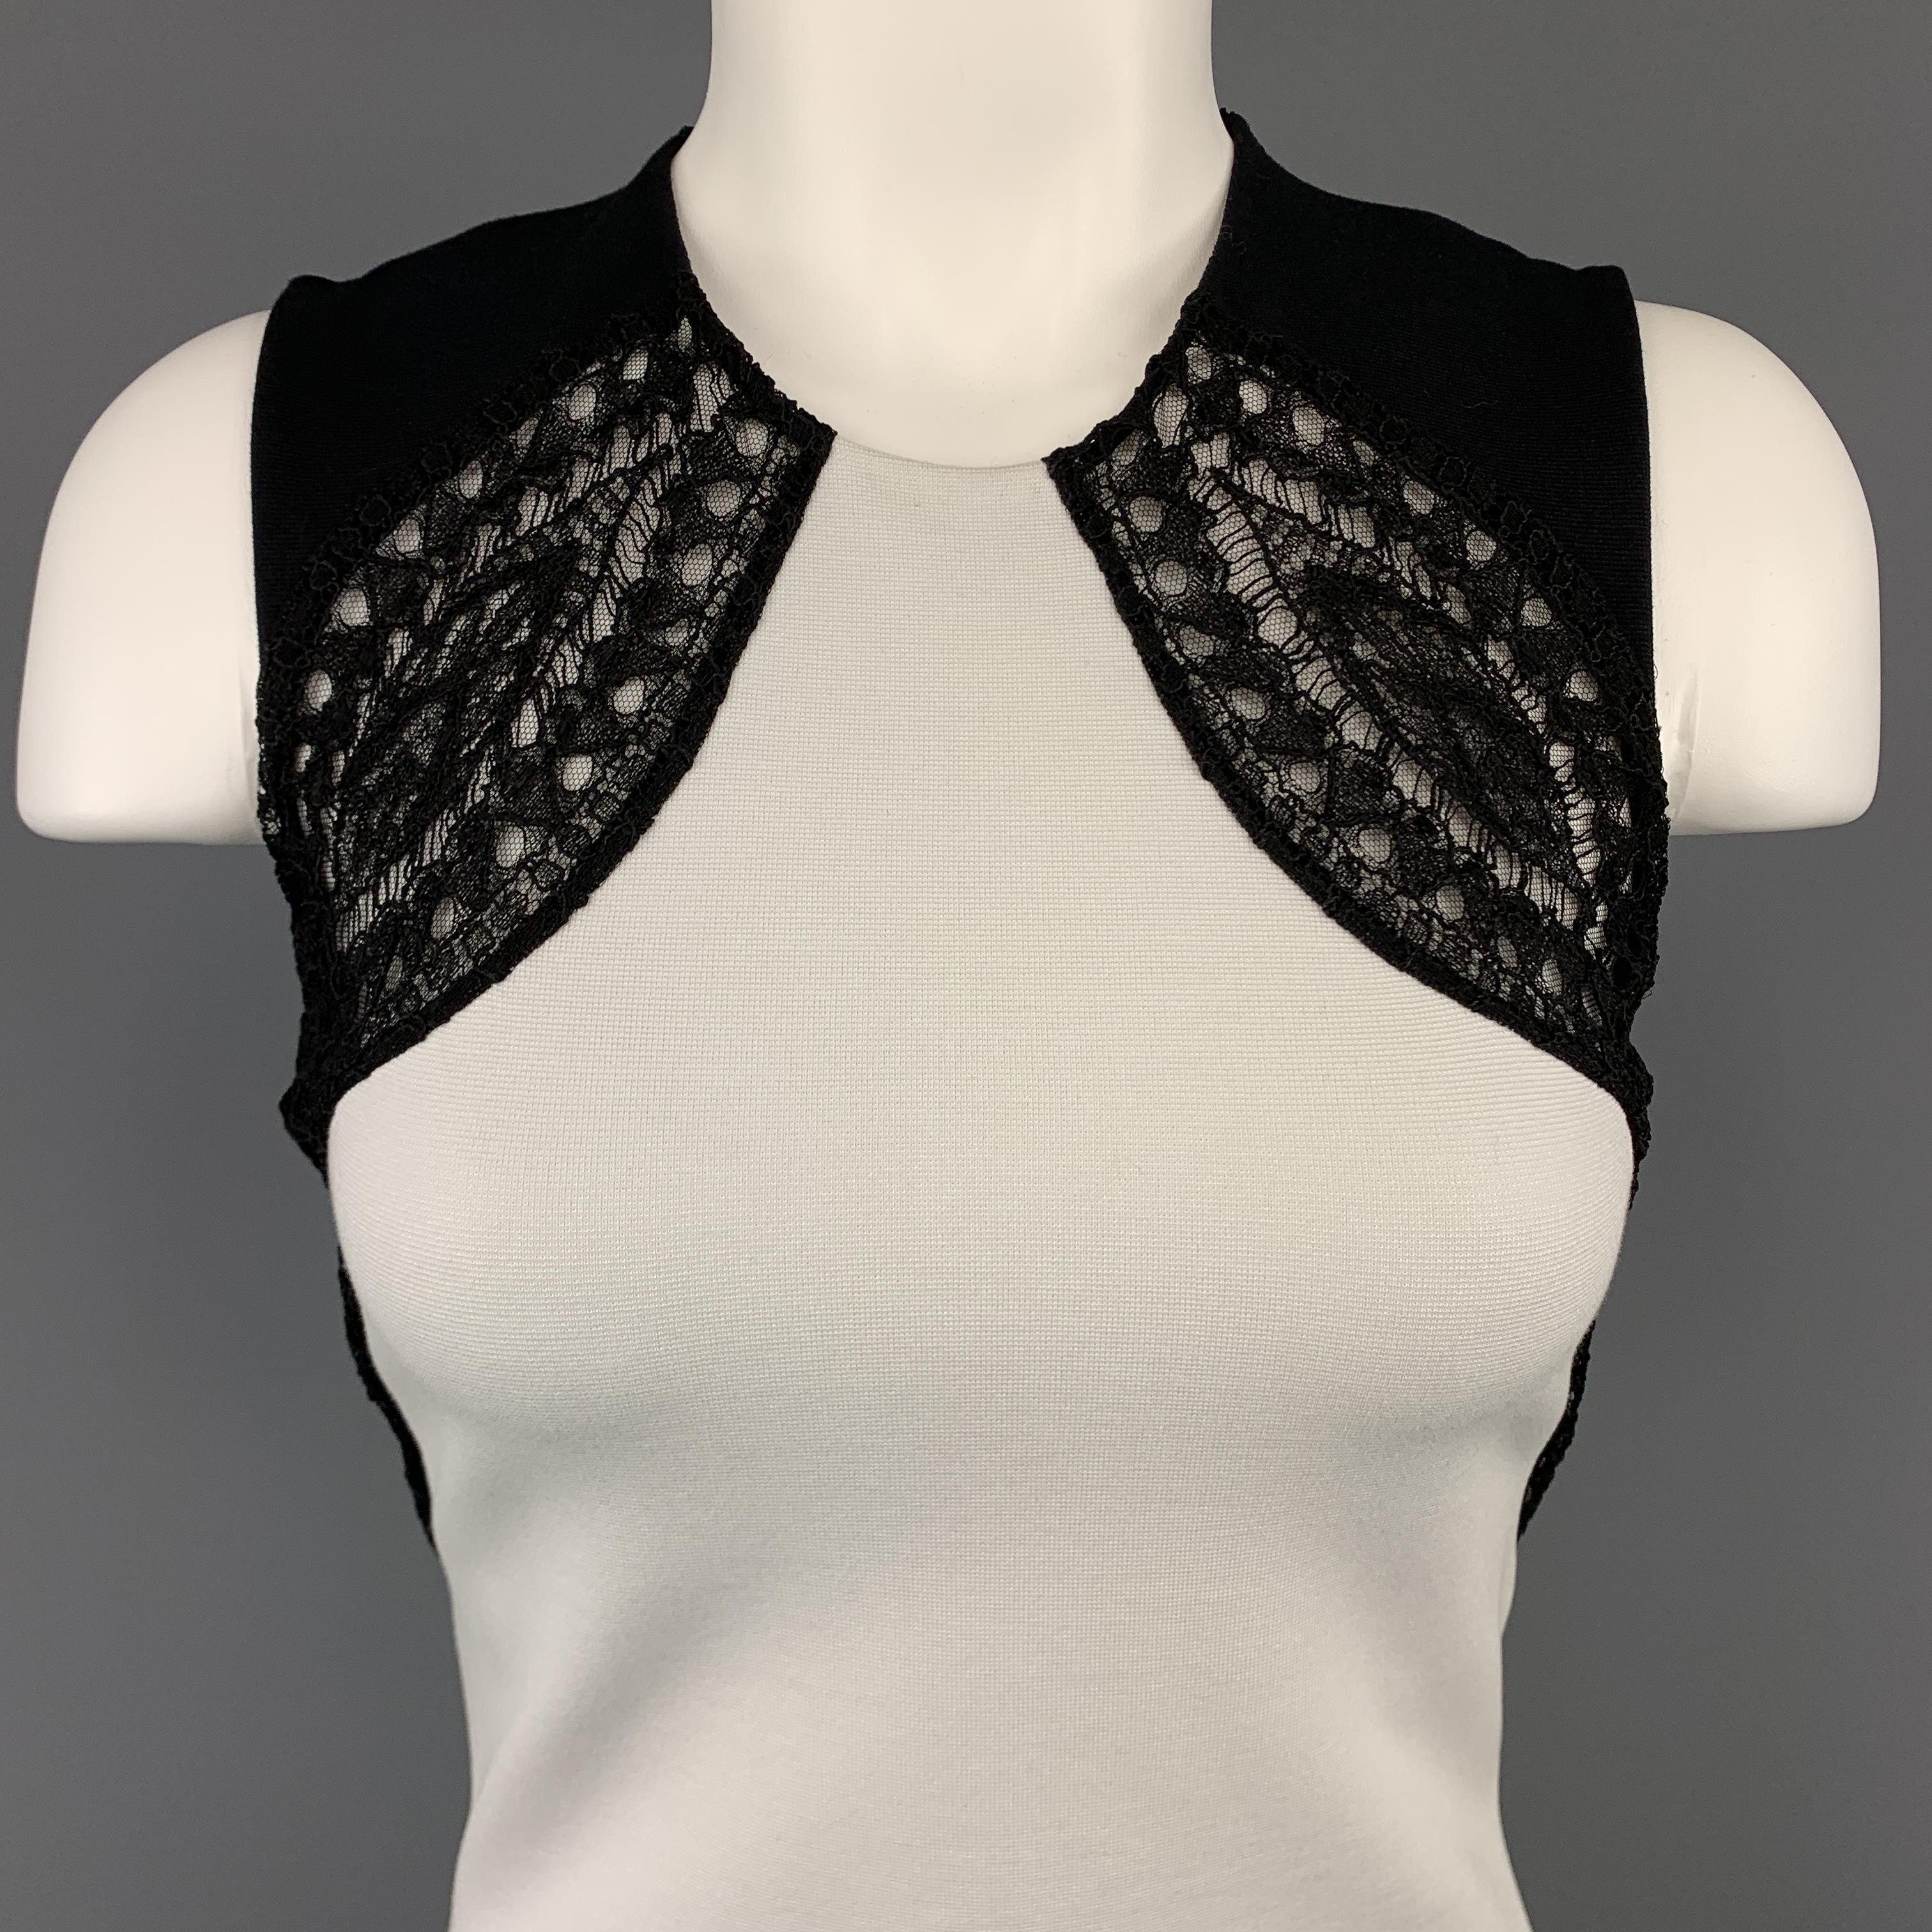 EMILIO PUCCI mini sheath dress comes in white stretch knit with a round neckline and black lace accented top. Made in Italy.

Excellent Pre-Owned Condition.
Marked: 4

Measurements:

Shoulder: 12 in.
Bust: 32 in.
Waist: 27 in.
Hip: 33 in.
Length: